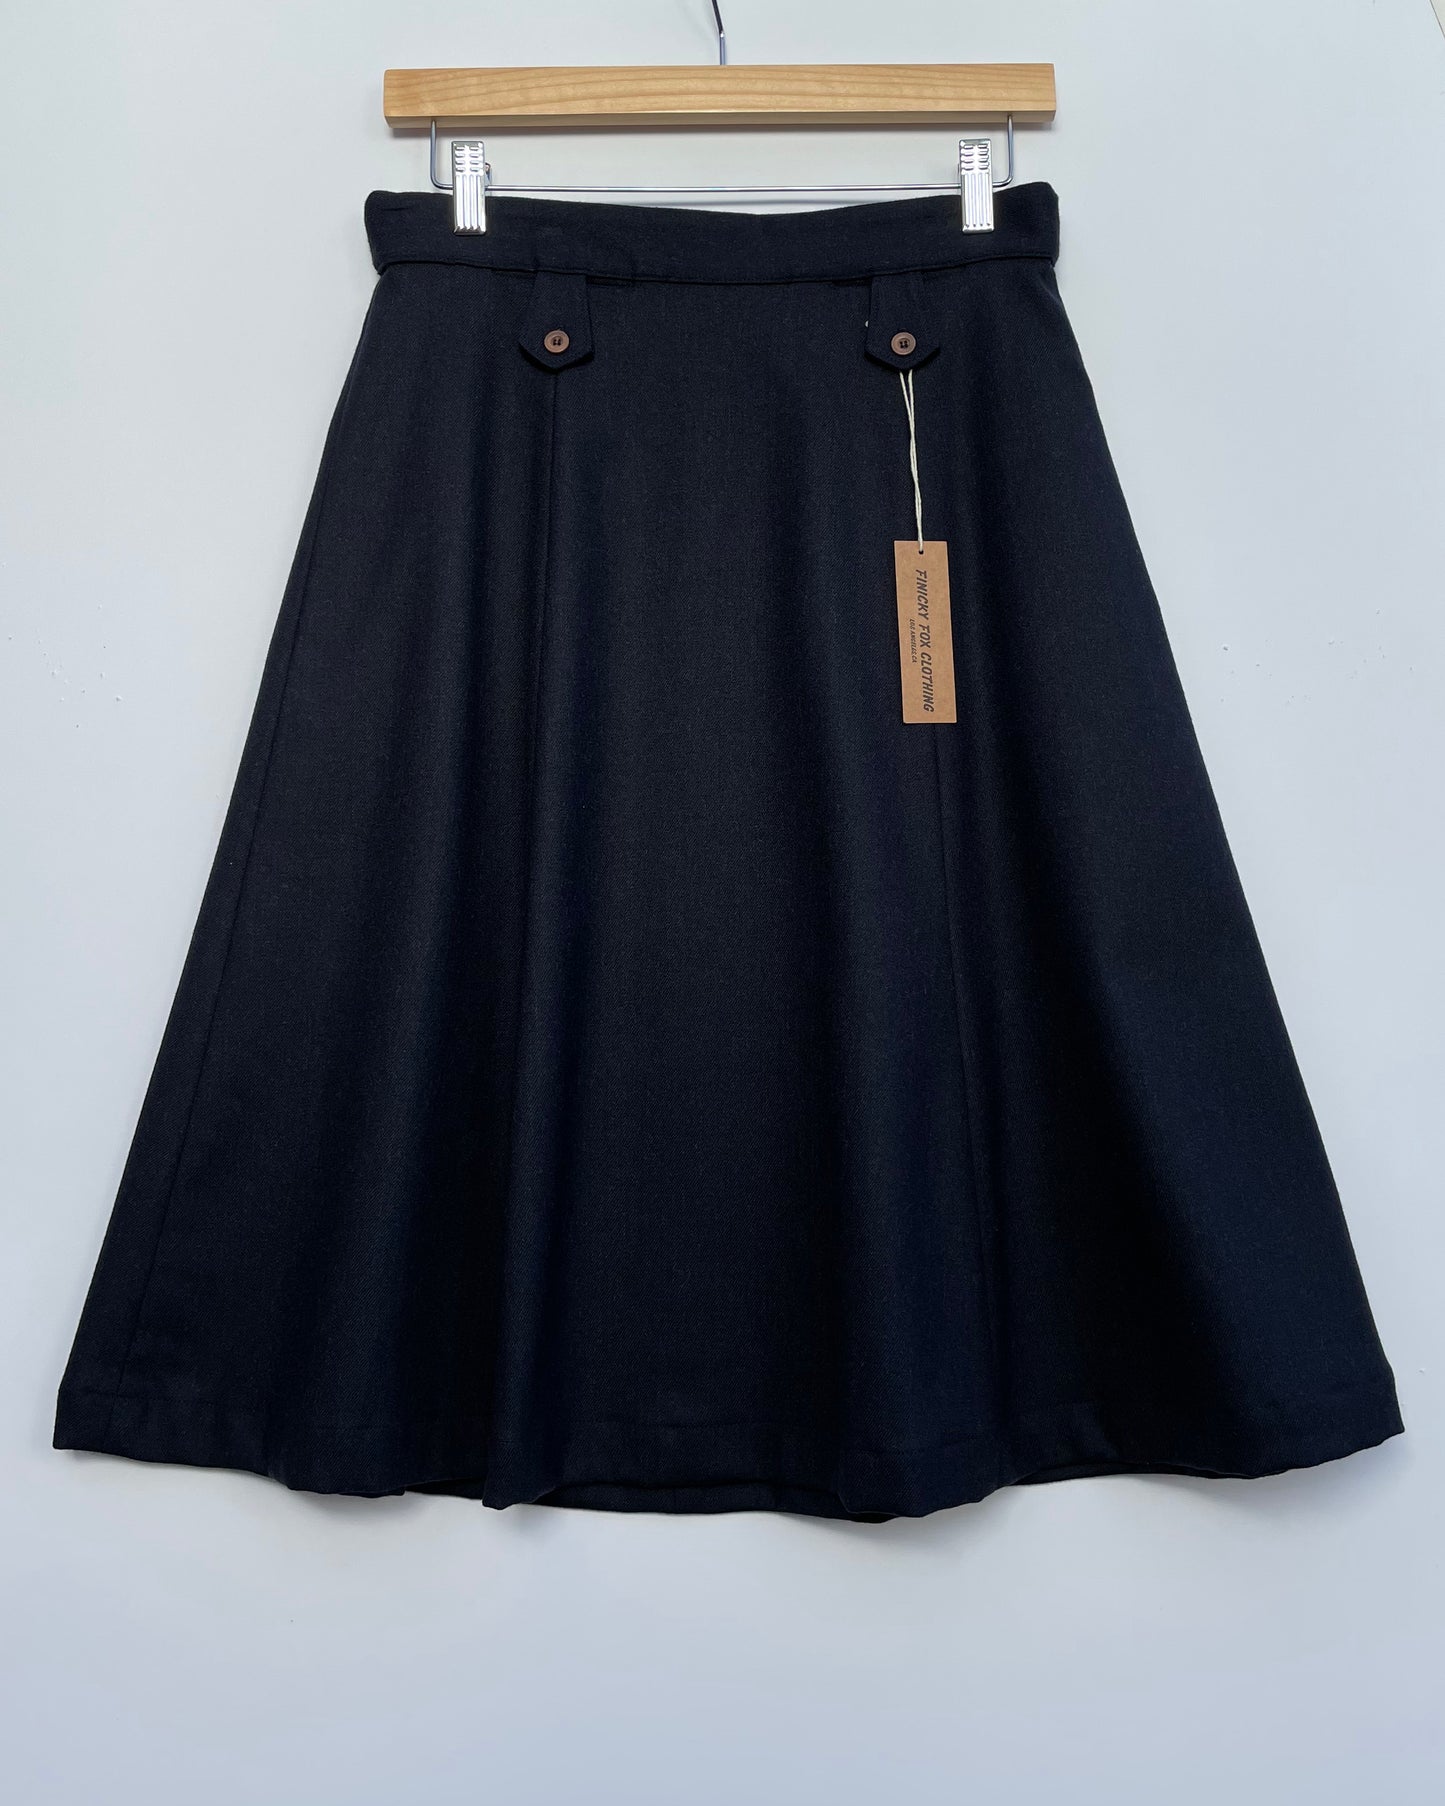 Lizzy Hollywood Swing Skirt- Navy Wool